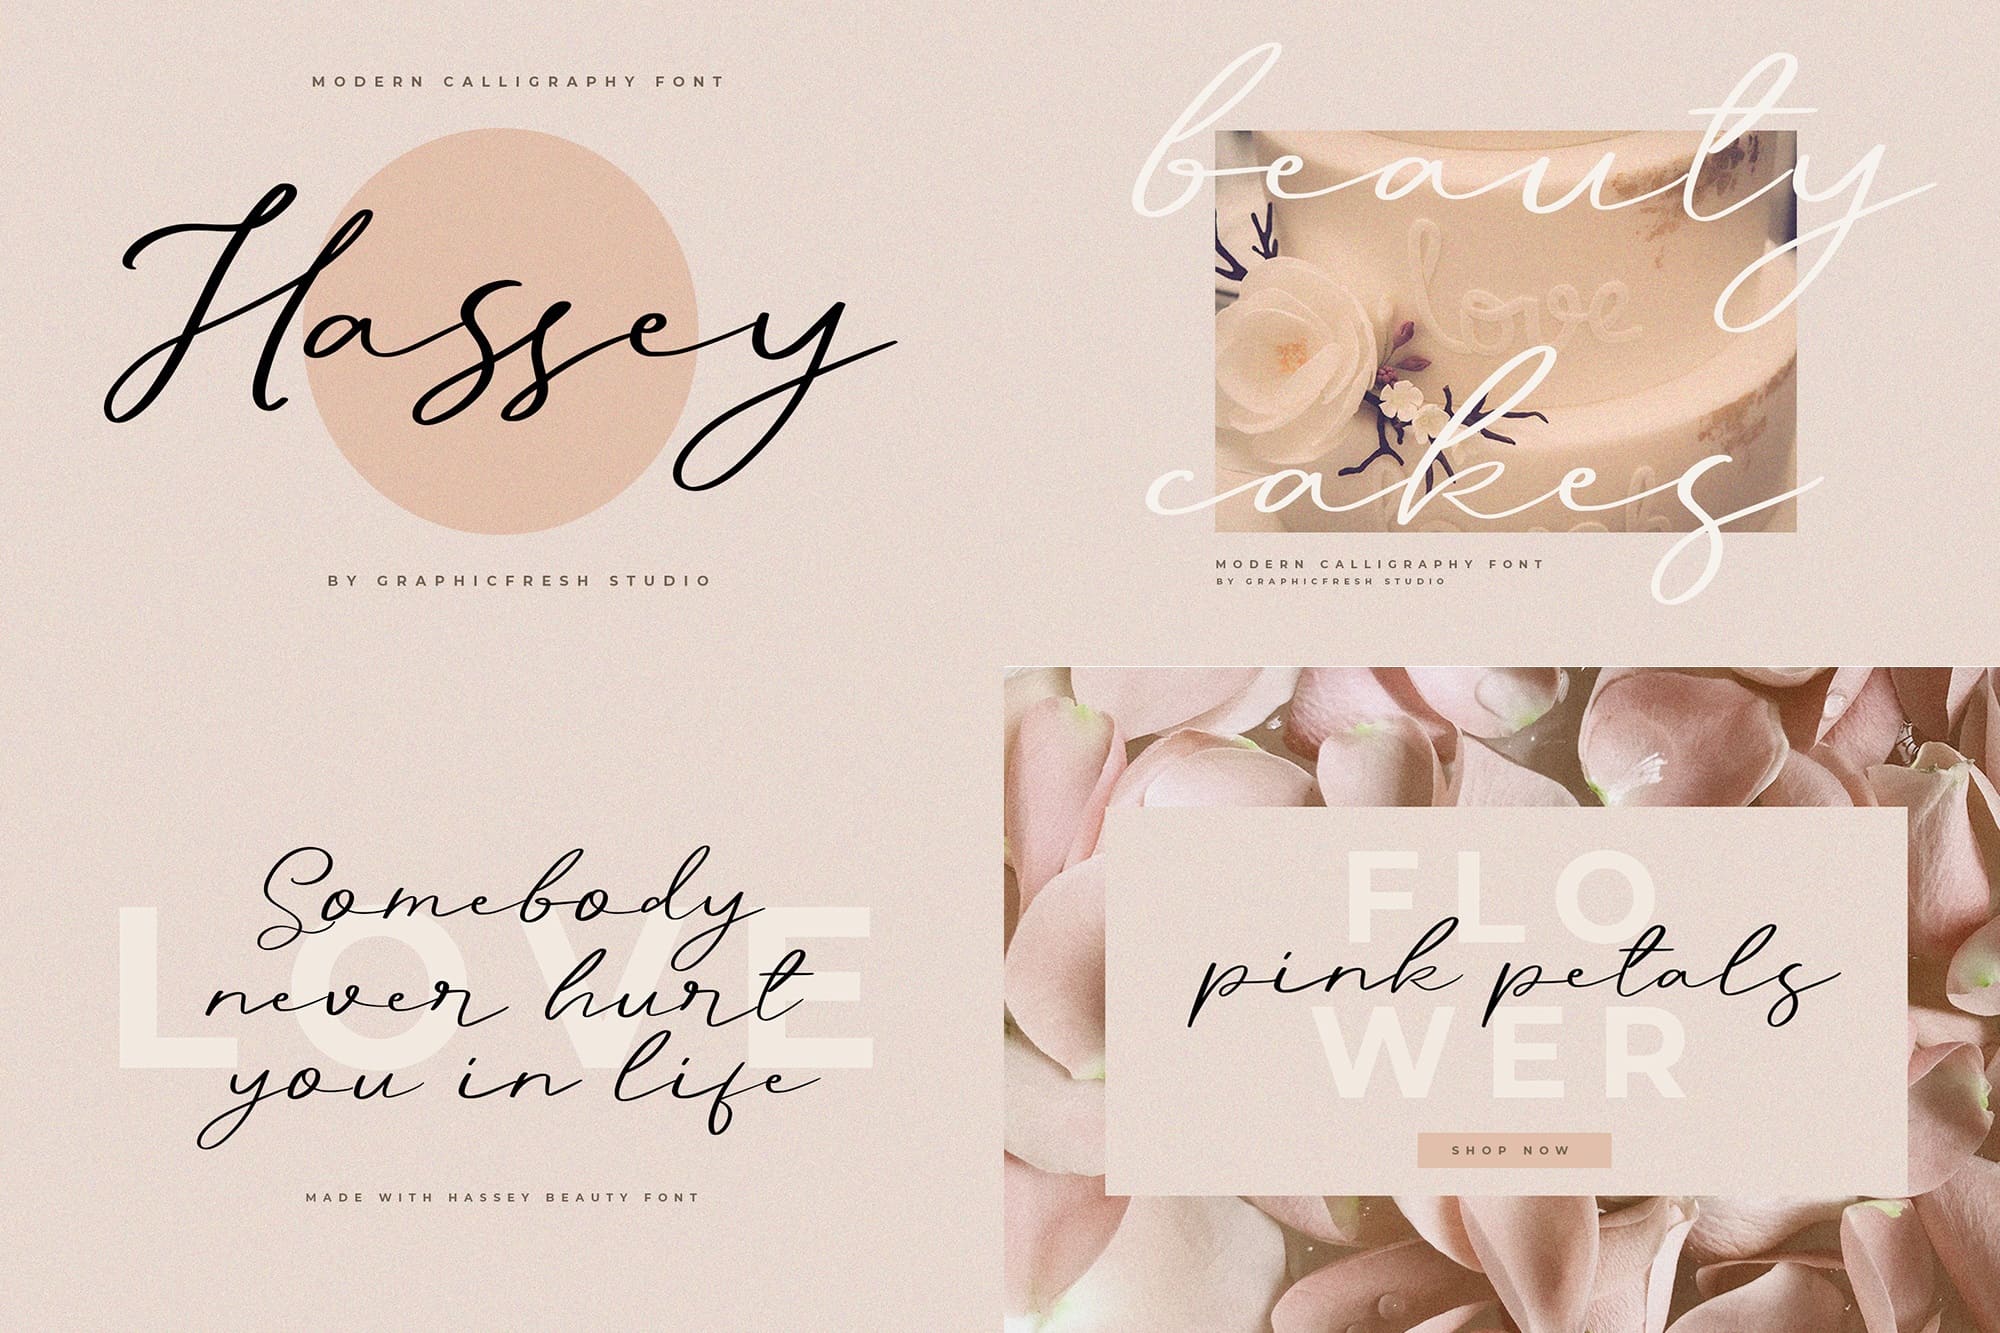 Hassey - A Modern Calligraphy Font.